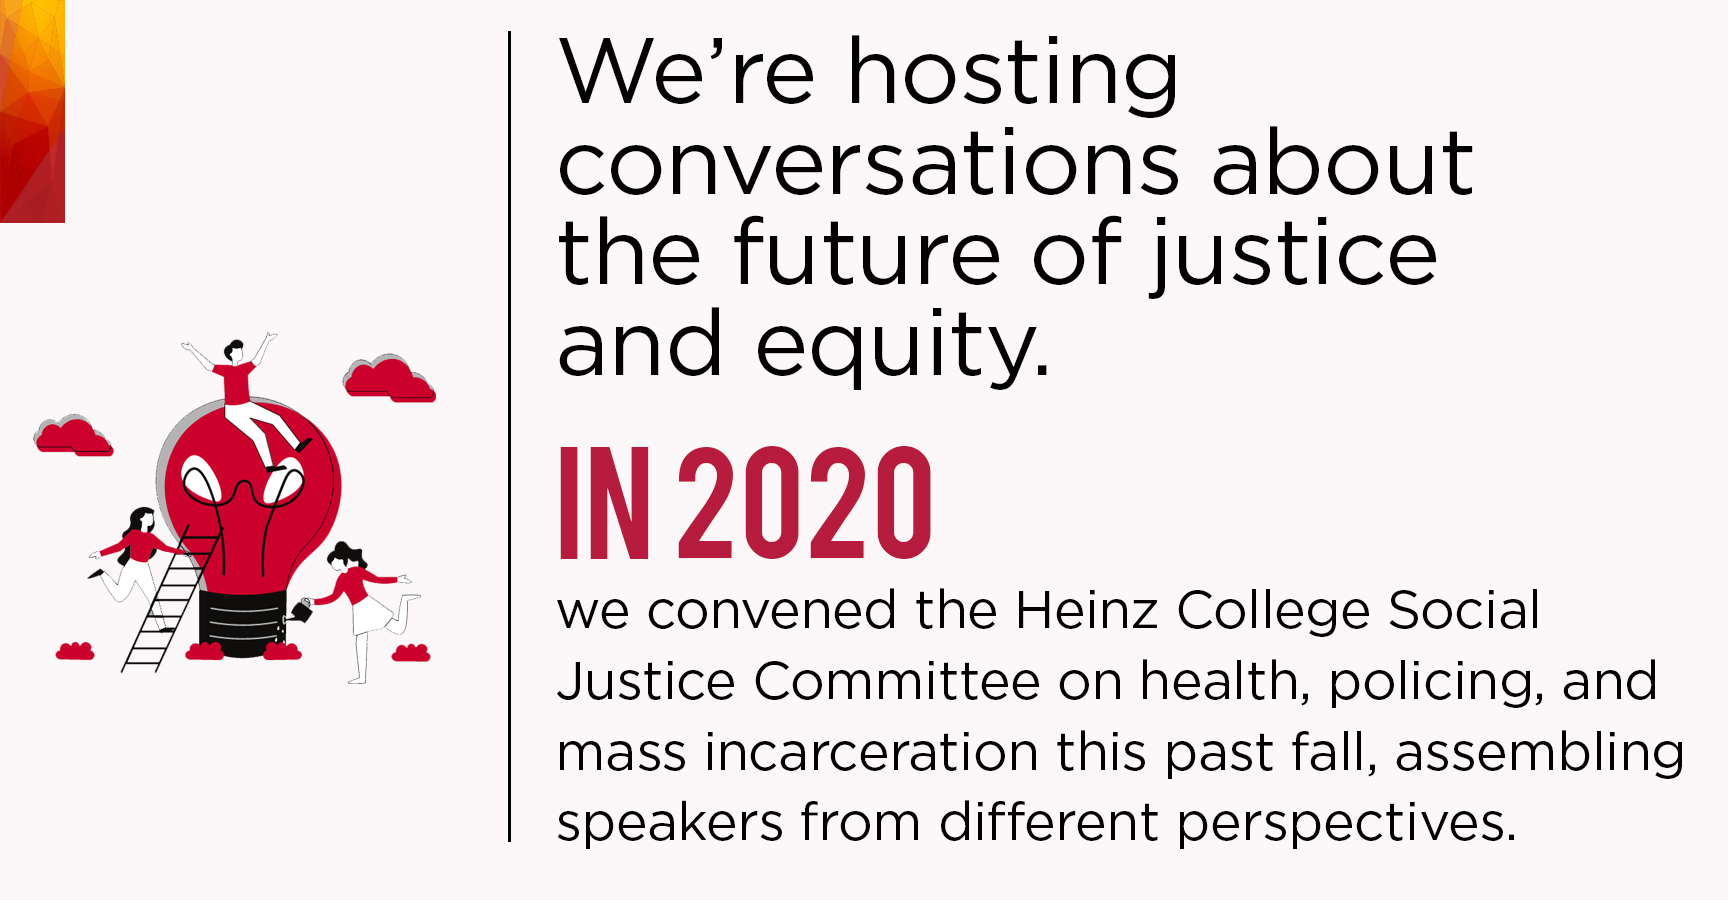 conversations on future of justice and equity